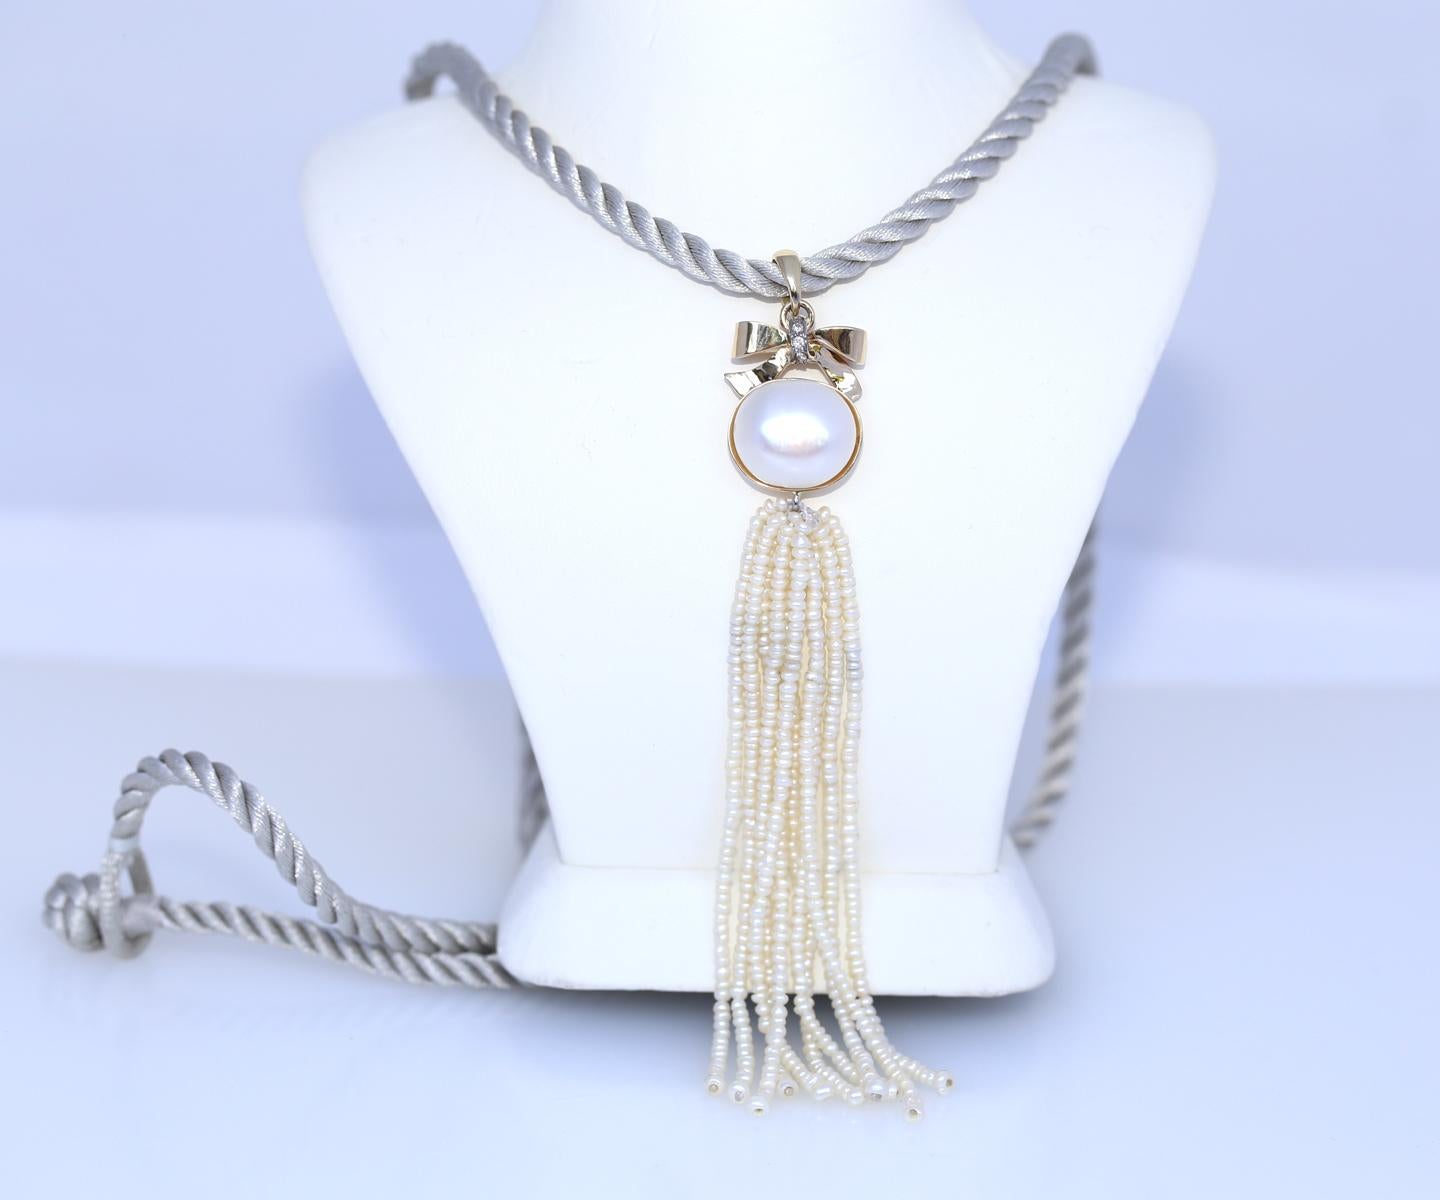 Modern design, pendant depicting a Gold bow with tiny Diamonds that holds a Pearl and multiple rows of tiny pearl beads. A simple, yet stylish grey cord is holding the pendant. 
The pendant moves in tune with the motion of the body.

Elegant item a